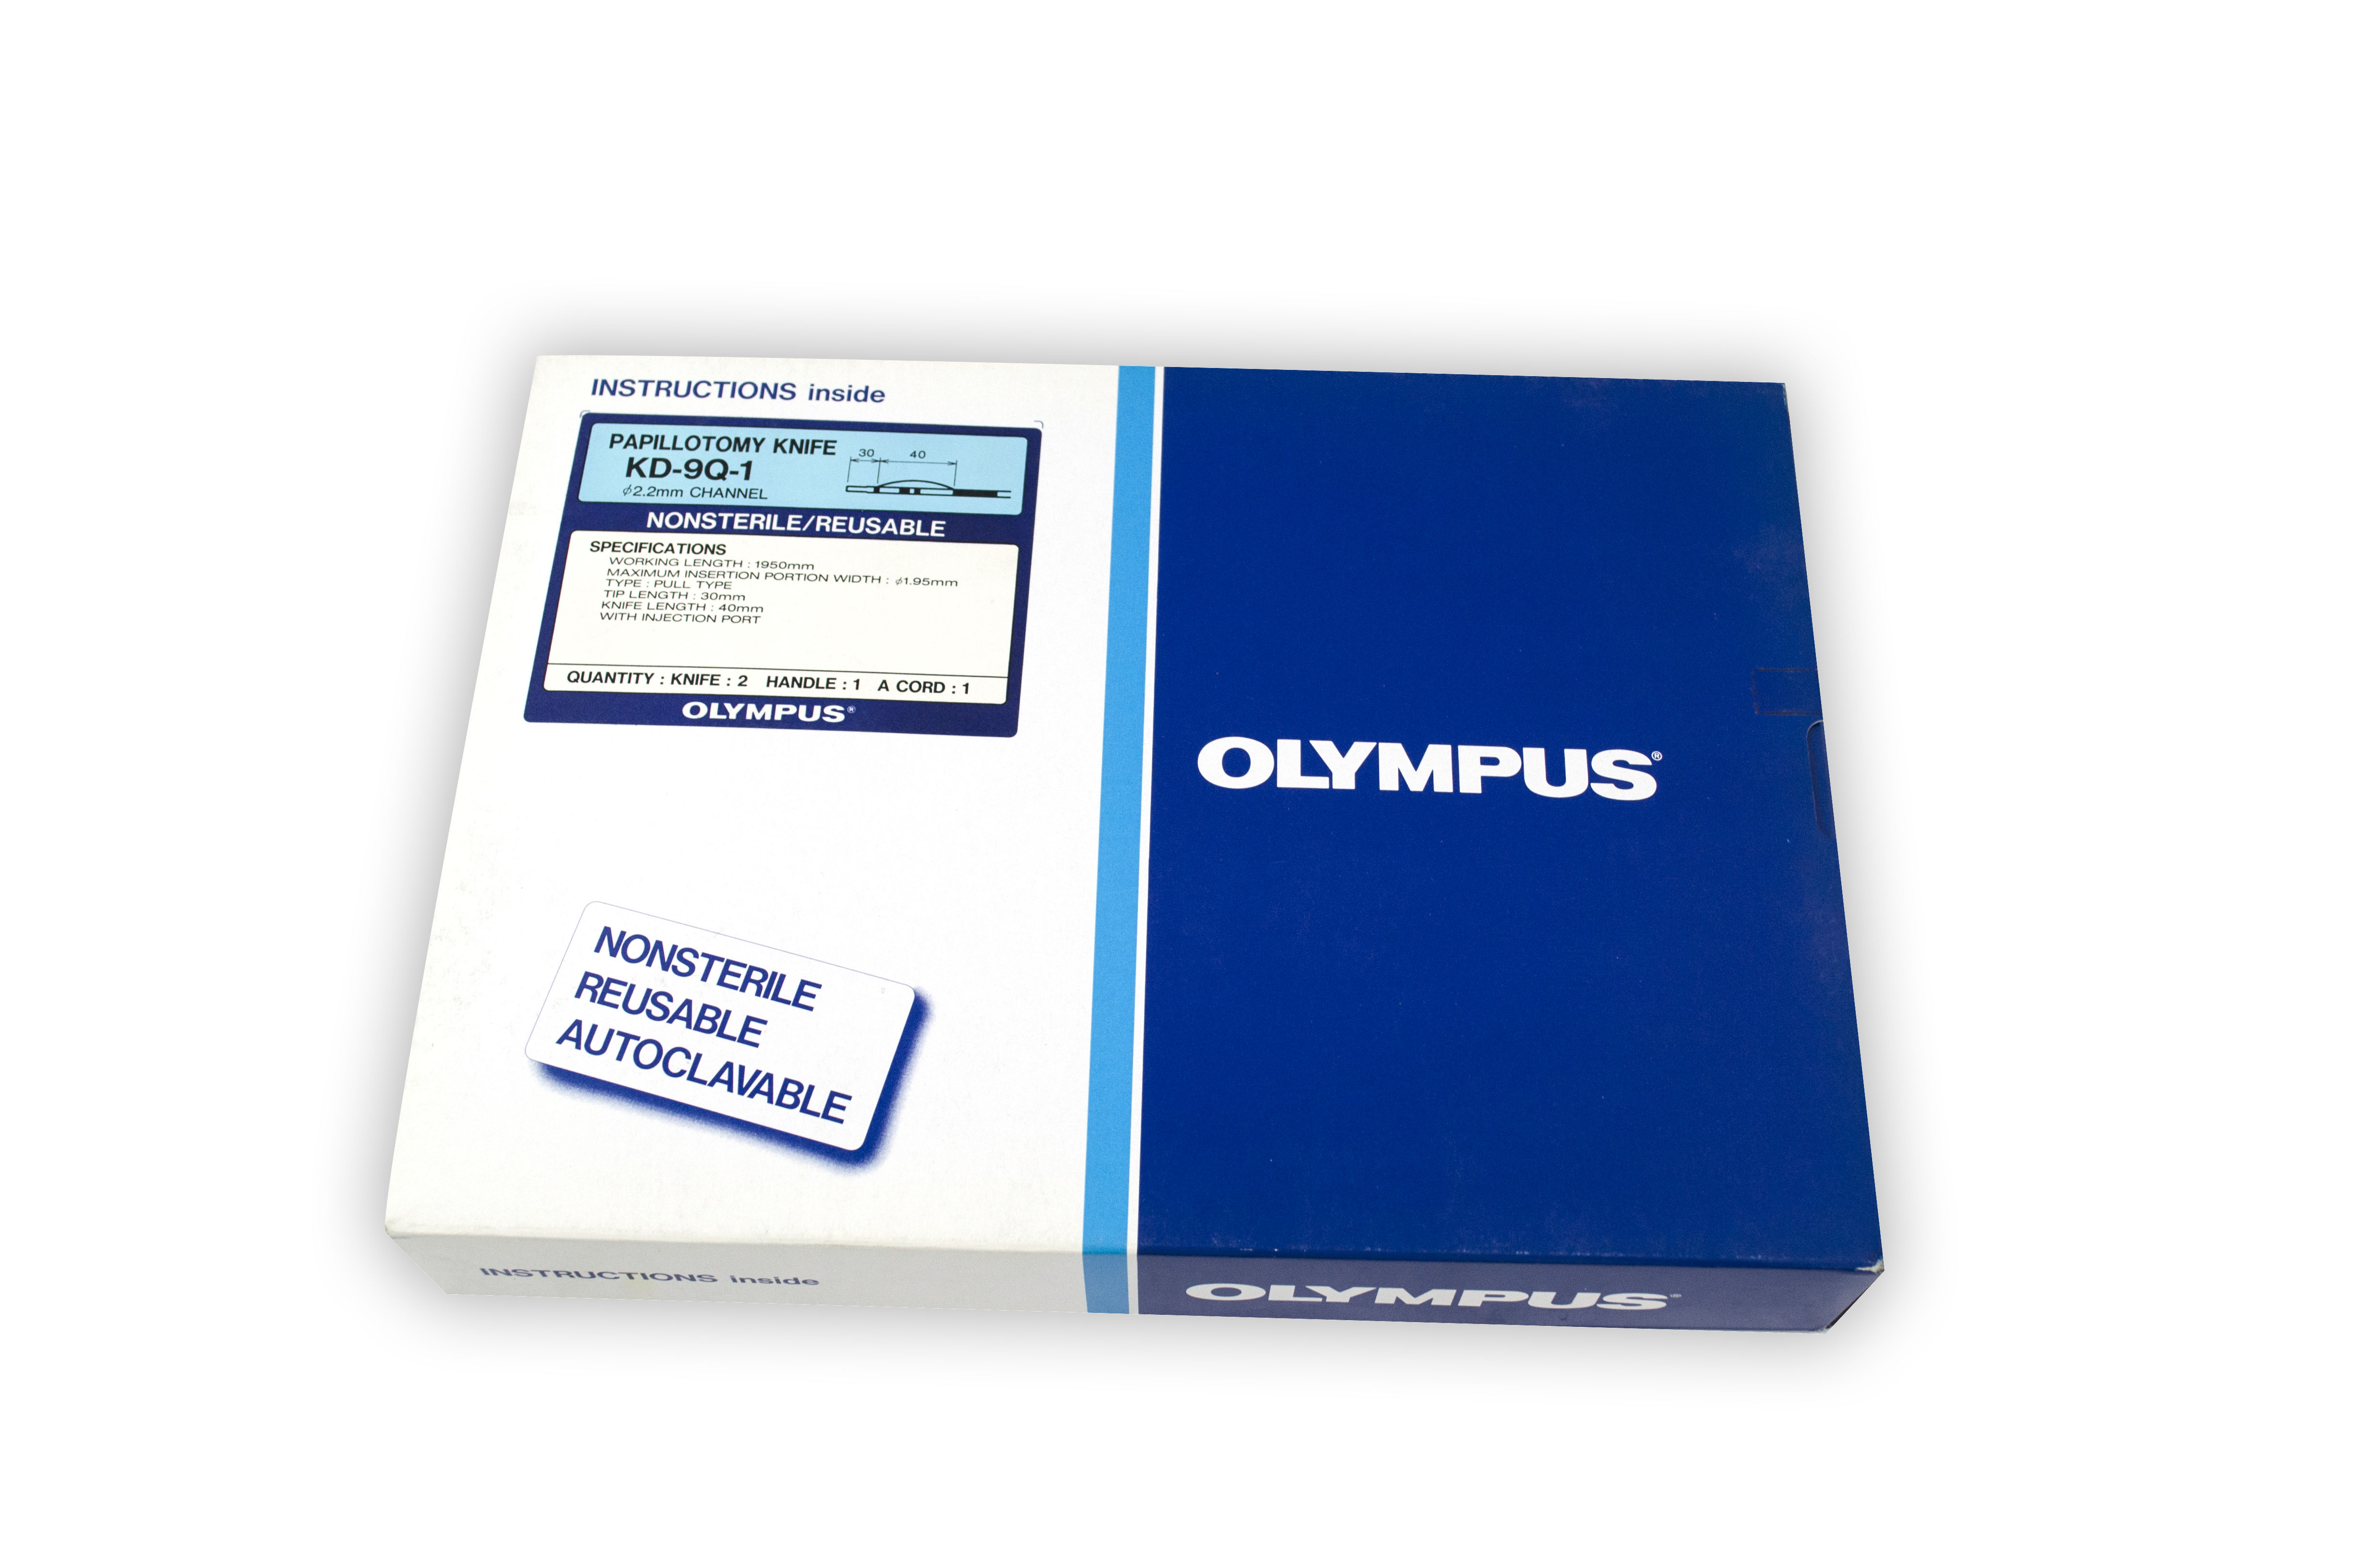 Olympus Reusable Sphincterotome - KD-9Q-1 (Pack of 2)